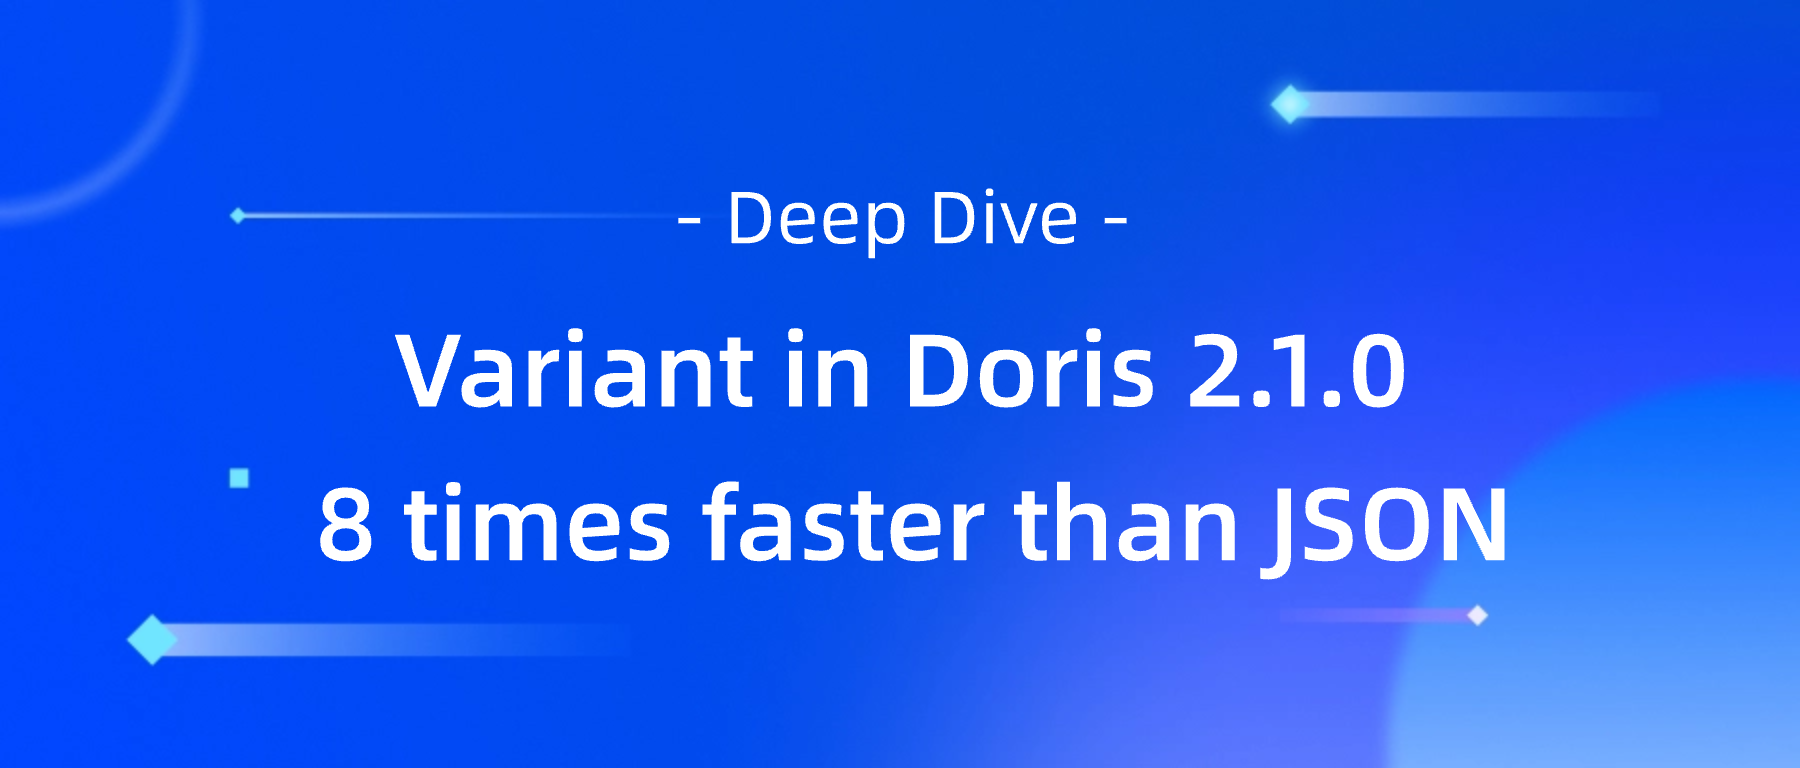 Variant in Apache Doris 2.1.0: a new data type 8 times faster than JSON for semi-structured data analysis